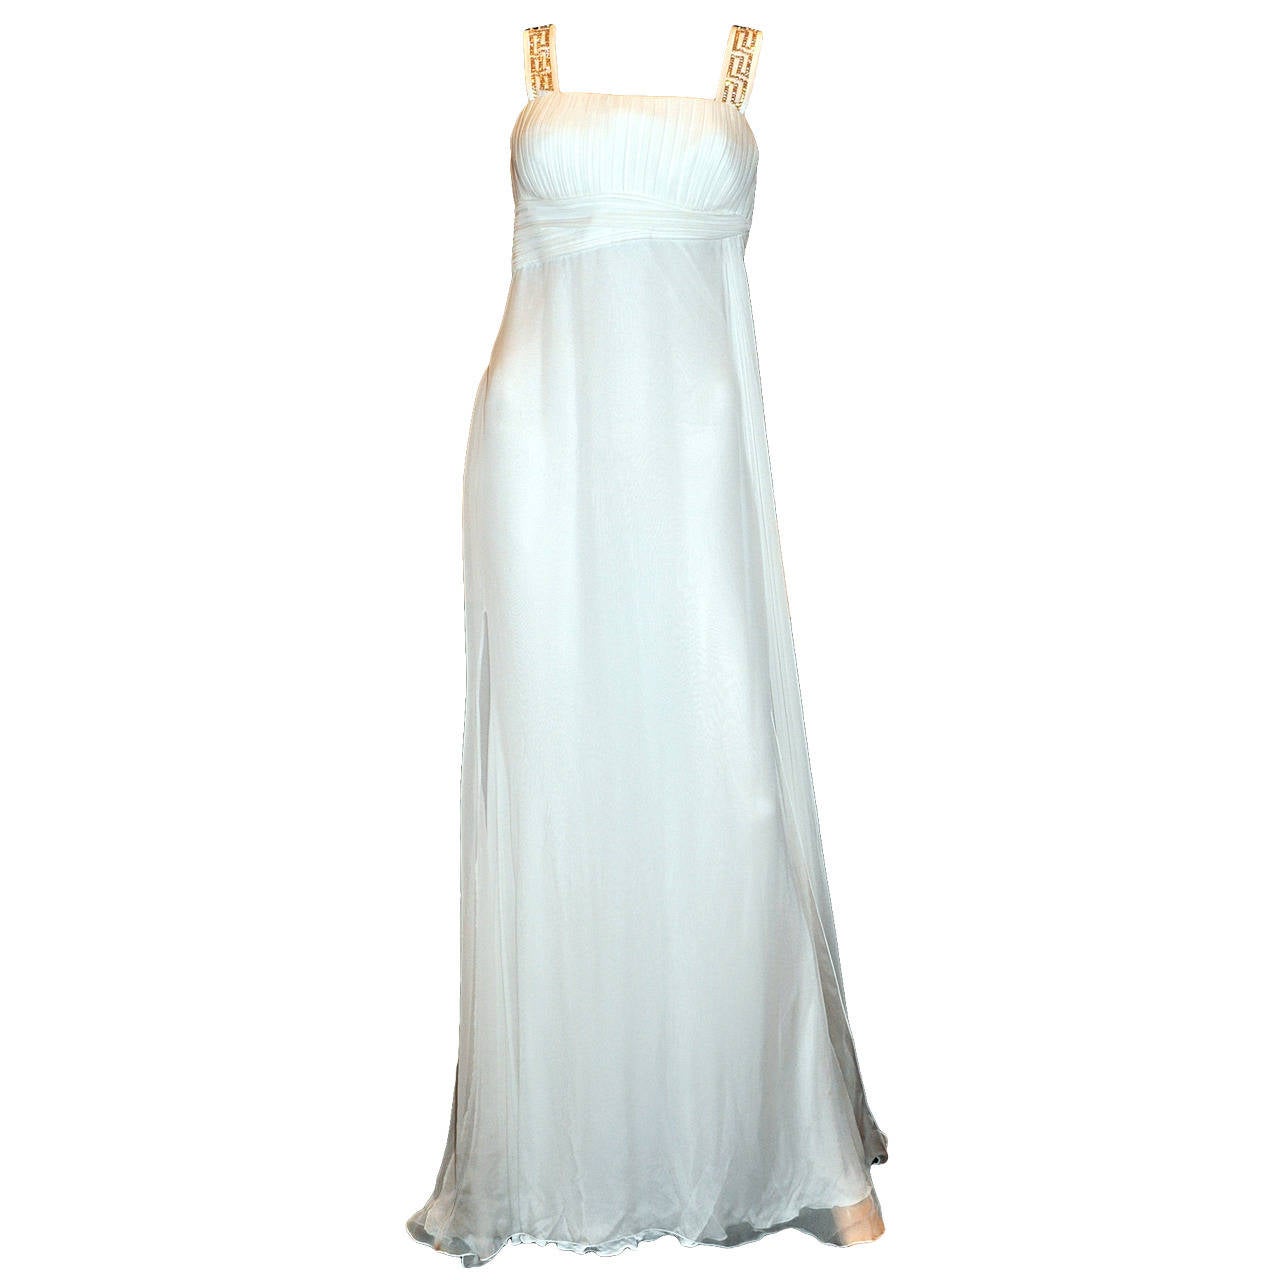 New Versace Crystal Embellished White Silk Gown 44 - 8 For Sale